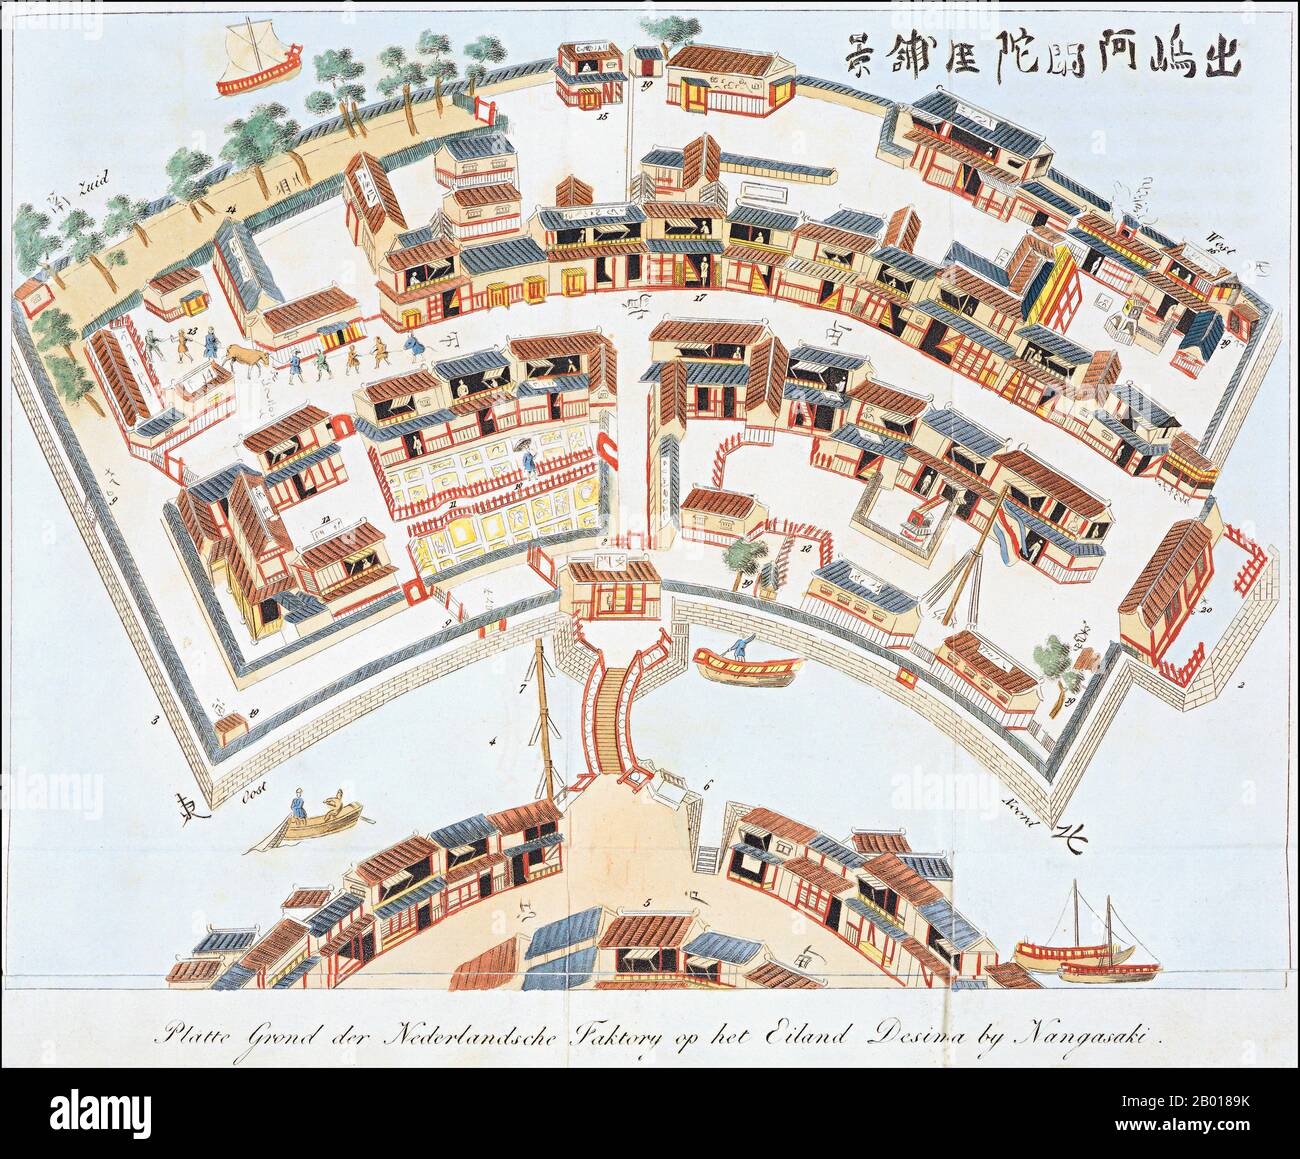 Japan: A map of the Dutch factory at Dejima Island, Nagasaki, c. 1824-1825.  Dejima (literally 'exit island'; Dutch: Desjima or Deshima, sometimes latinised as Decima or Dezima) was a small fan-shaped artificial island built in the bay of Nagasaki in 1634. This island, which was formed by digging a canal through a small peninsula, remained as the single place of direct trade and exchange between Japan and the outside world during the Edo period. Dejima was built to constrain foreign traders as part of the 'sakoku' self-imposed isolationist policy. Stock Photo